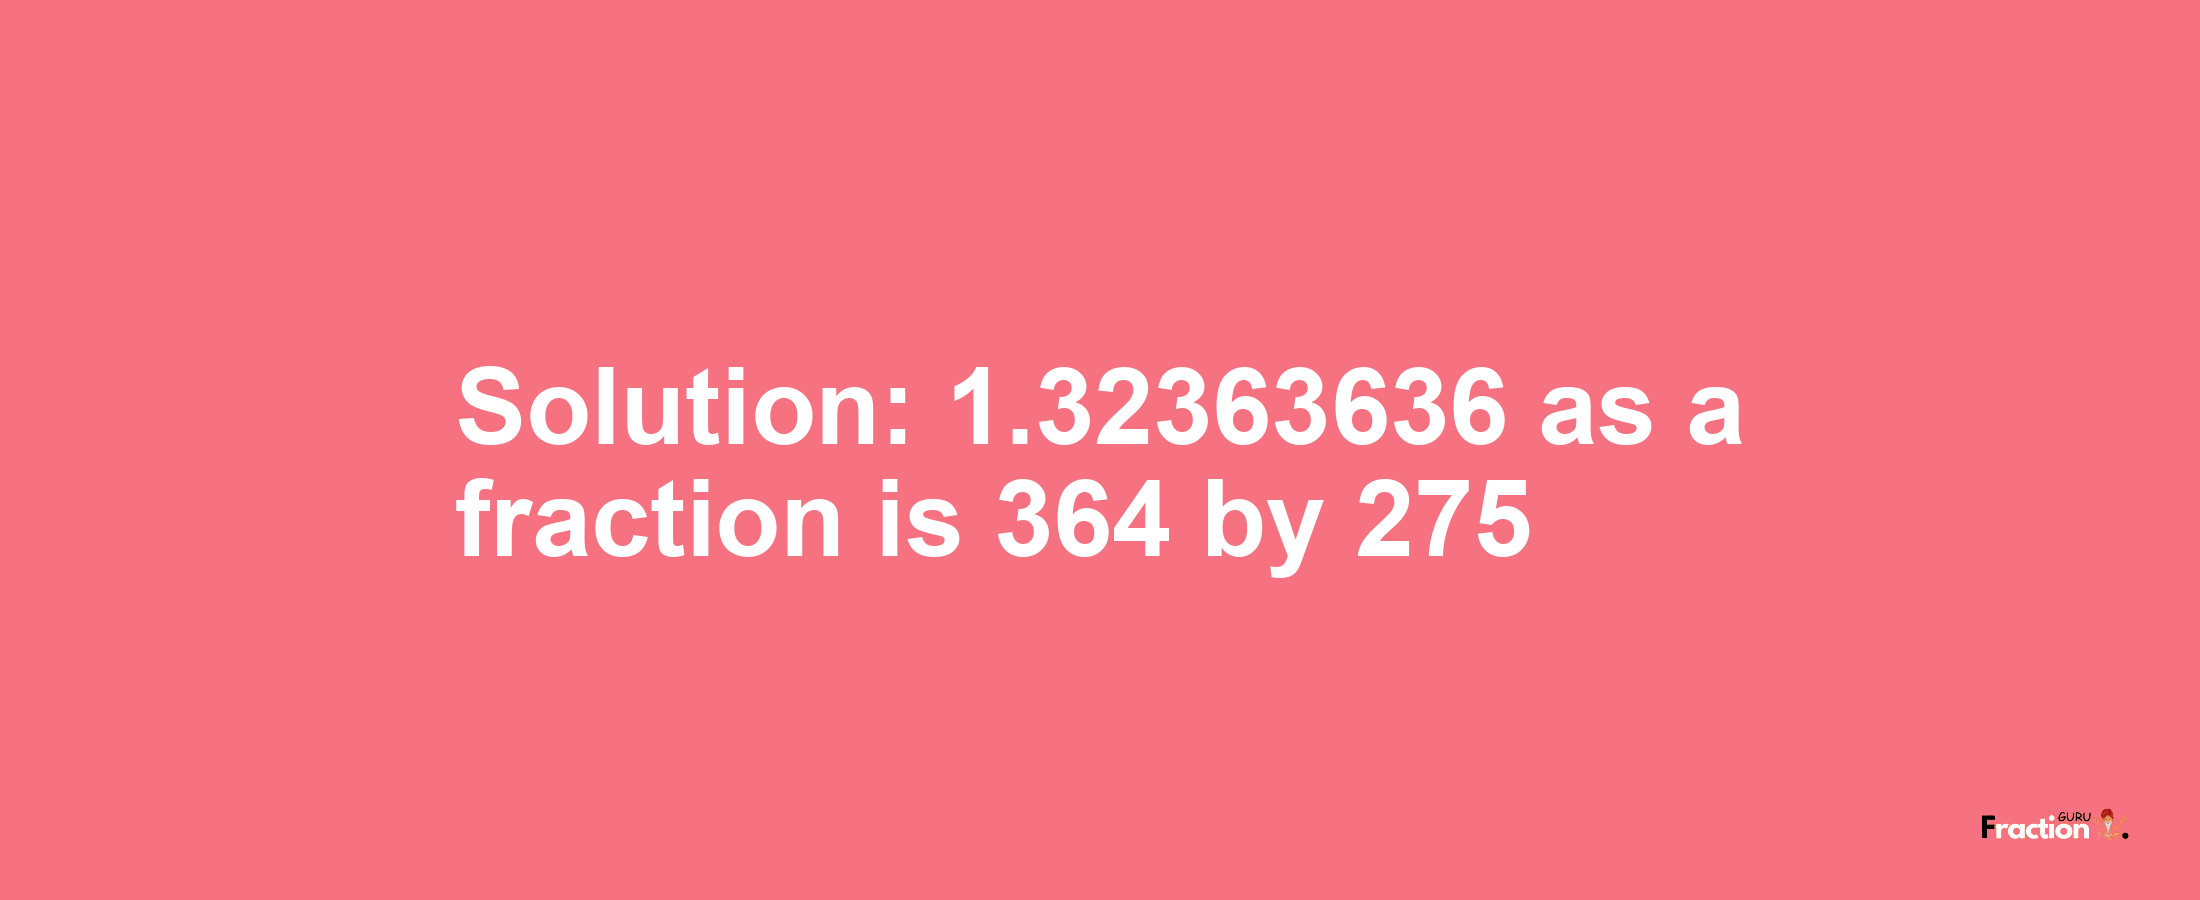 Solution:1.32363636 as a fraction is 364/275